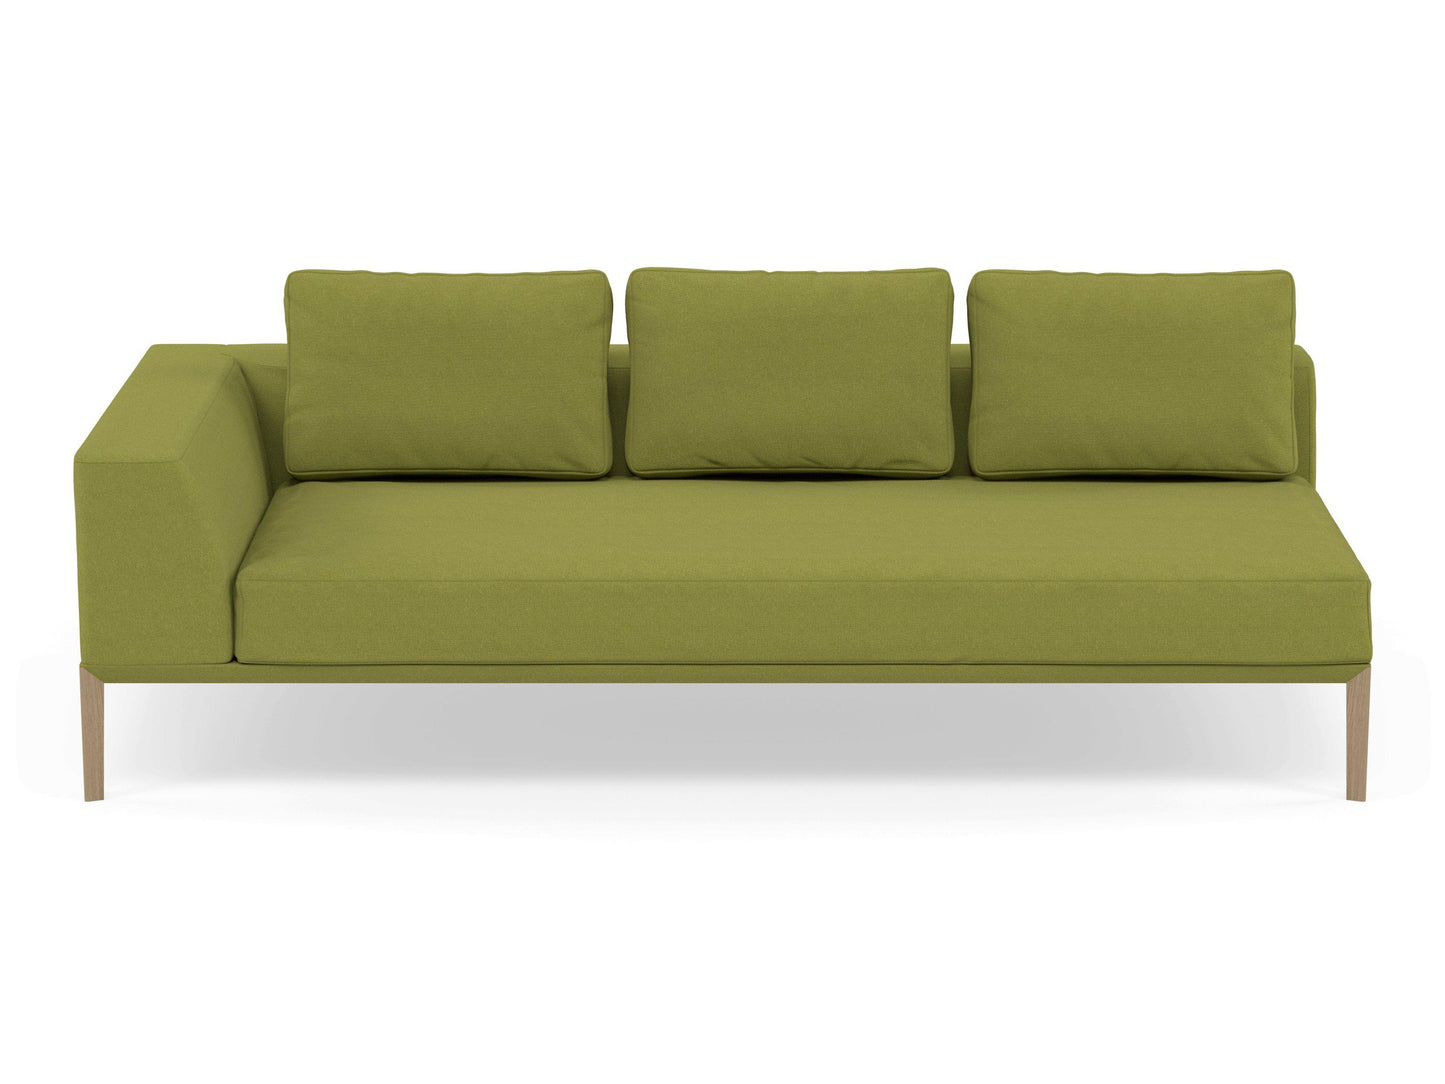 Modern 3 Seater Chaise Lounge Style Sofa with Right Armrest in Lime Green Fabric-Natural Oak-Distinct Designs (London) Ltd